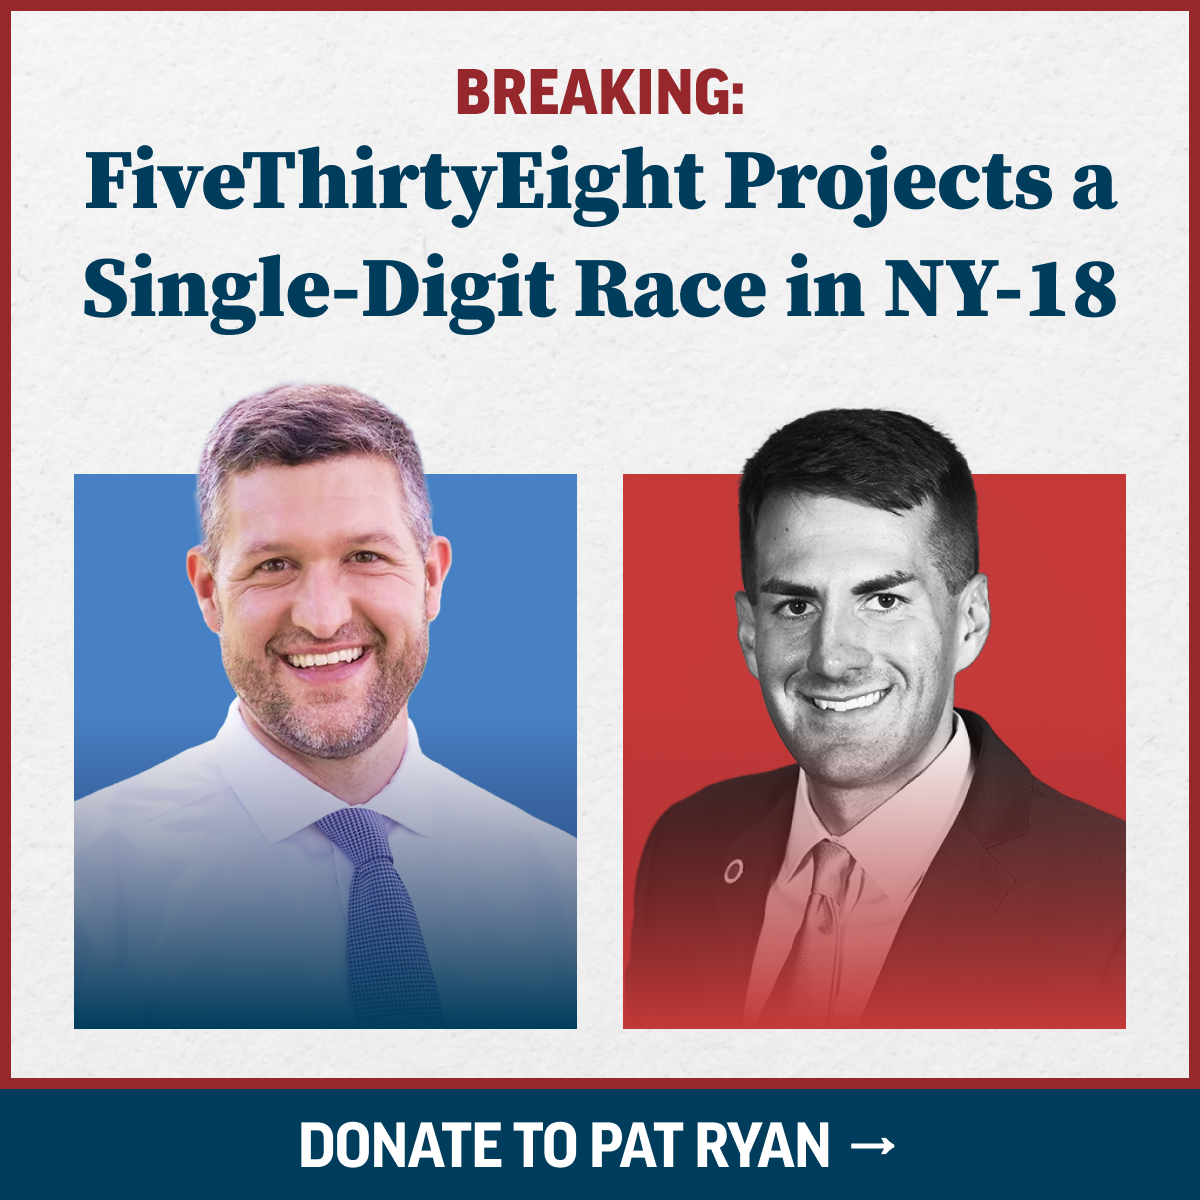 Poster of Democratic Congressman Pat Ryan next to his Republican opponent urging voters to donate. It says 